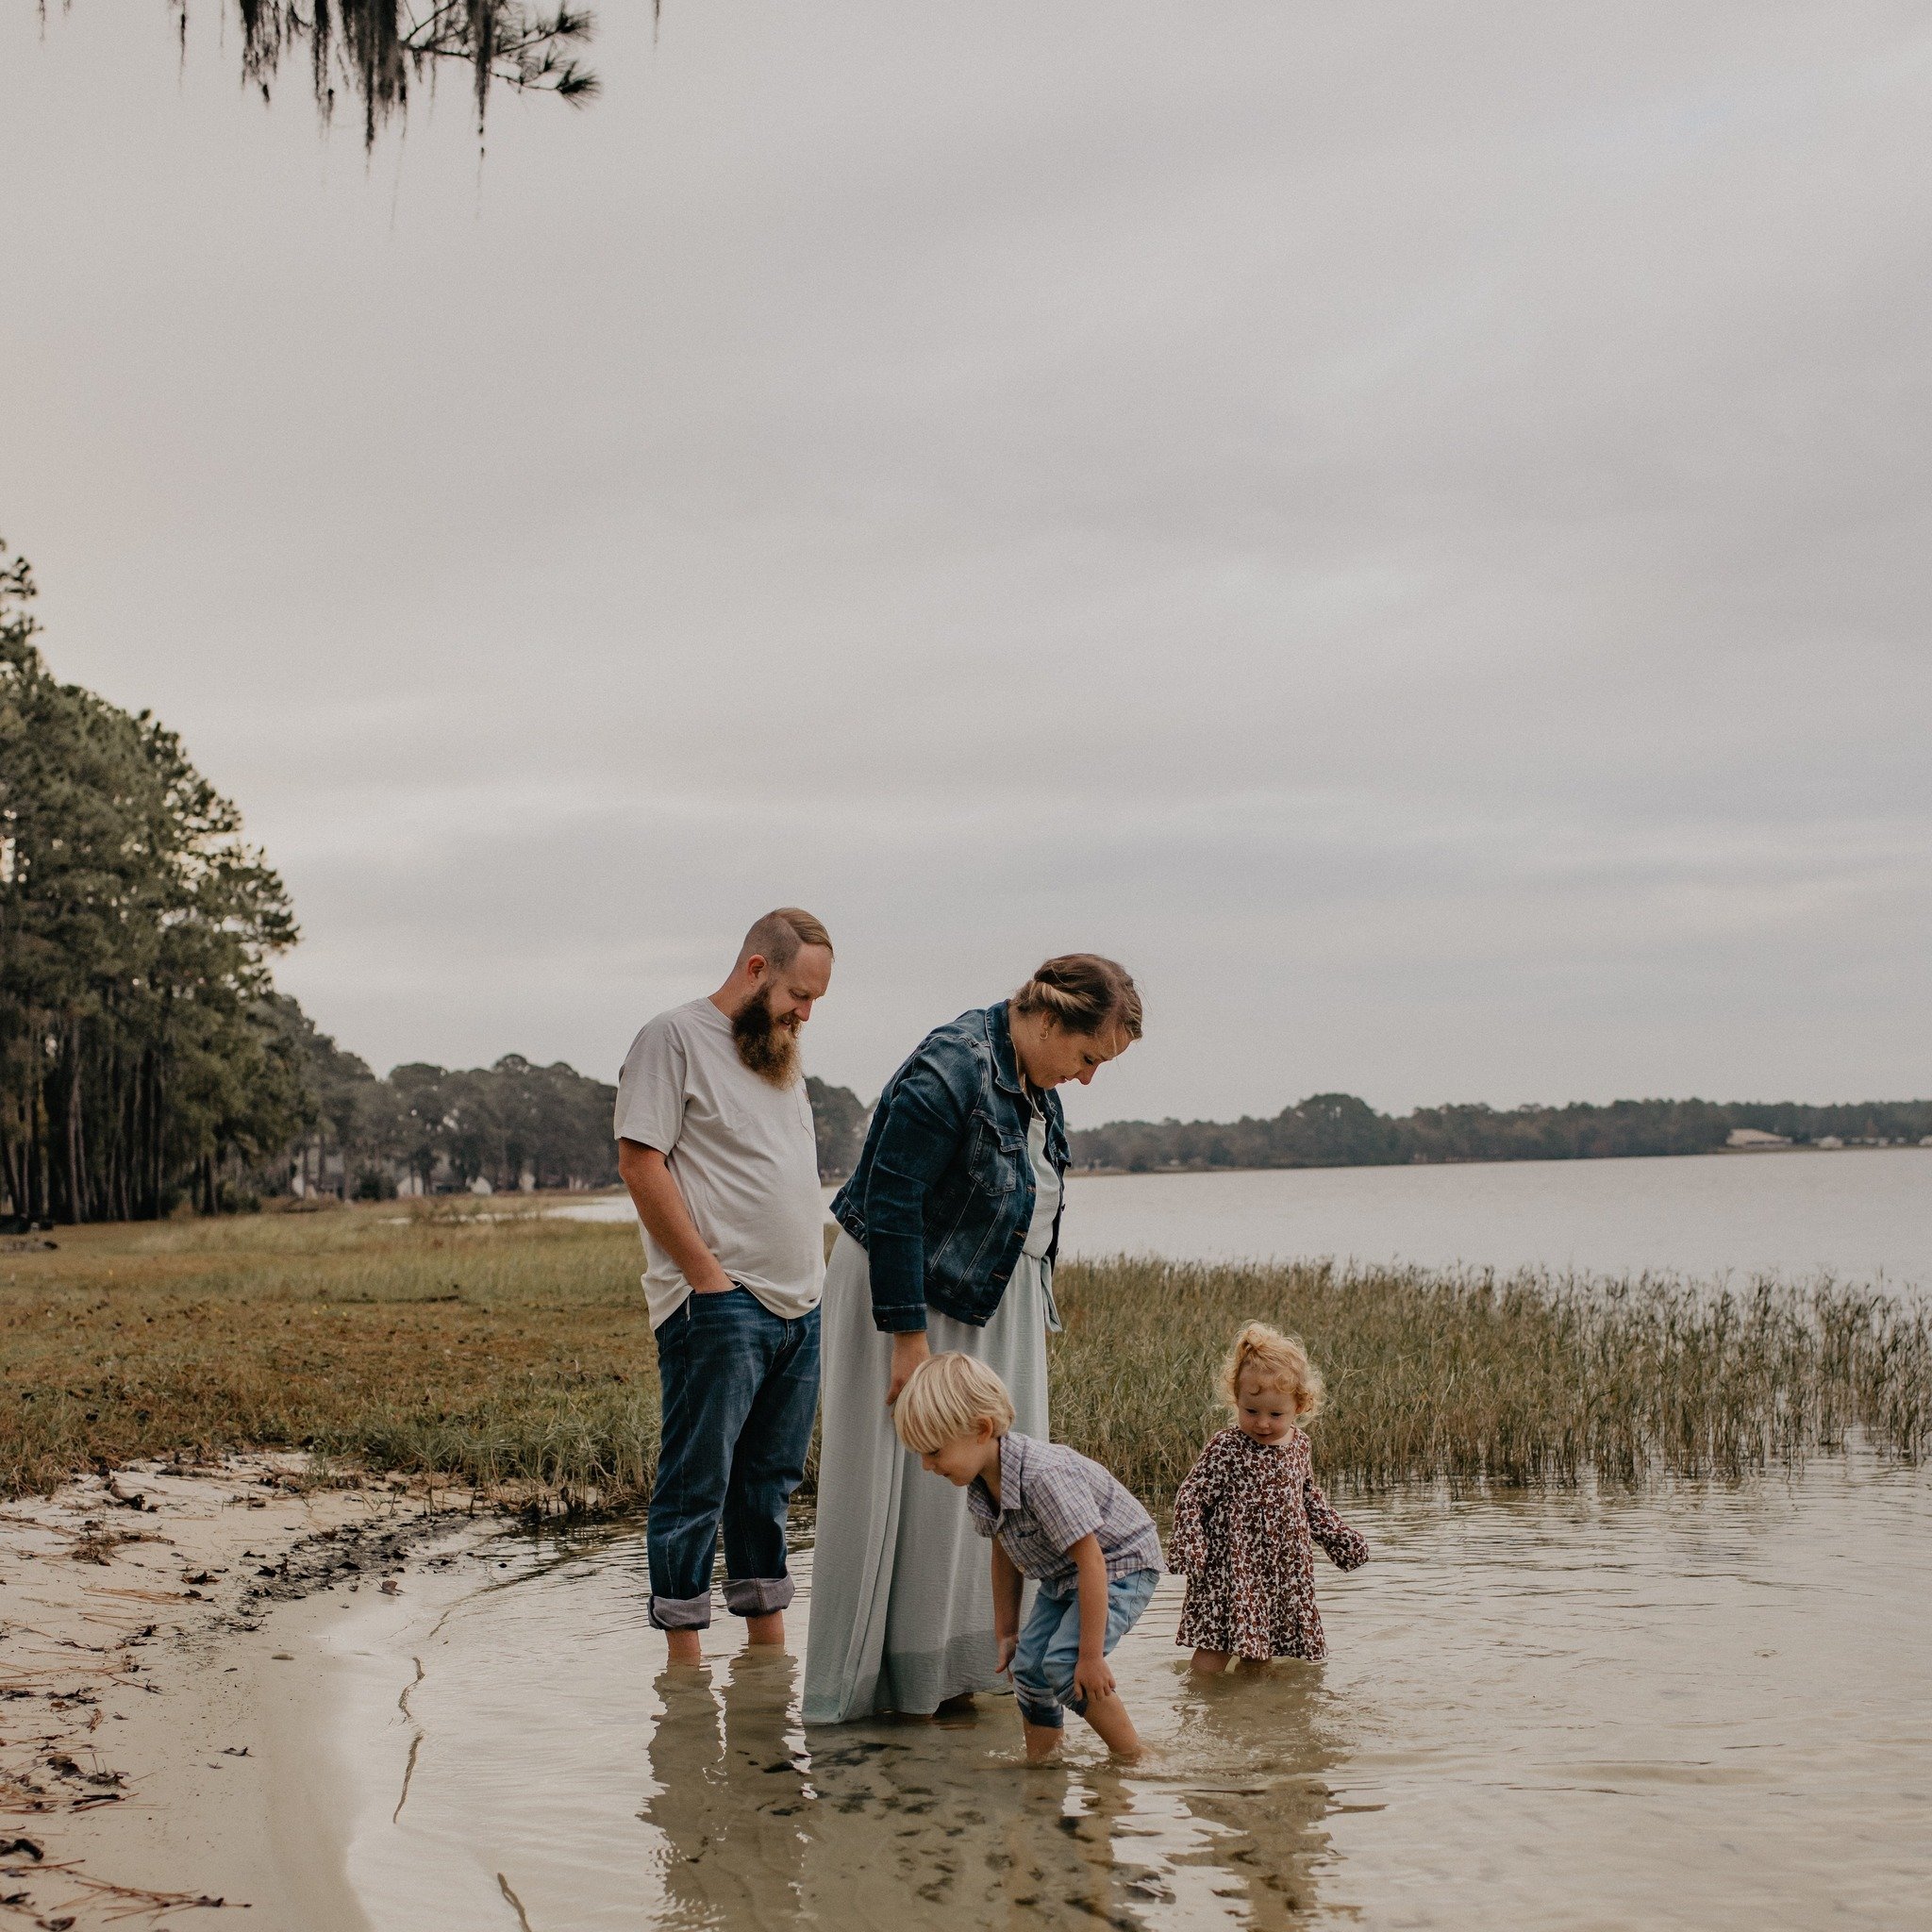 Ready for some warm weather water sessions over here. Whose in?!
.
.
.
.
.
.
.
.
#thefamilycollective
#lifestylephotography
#jacksonvillefamilyphotography
#jaxfamilyphotography
#flemingislandfamilyphotography
#staugustinefamilyphotography
#jacksonvil